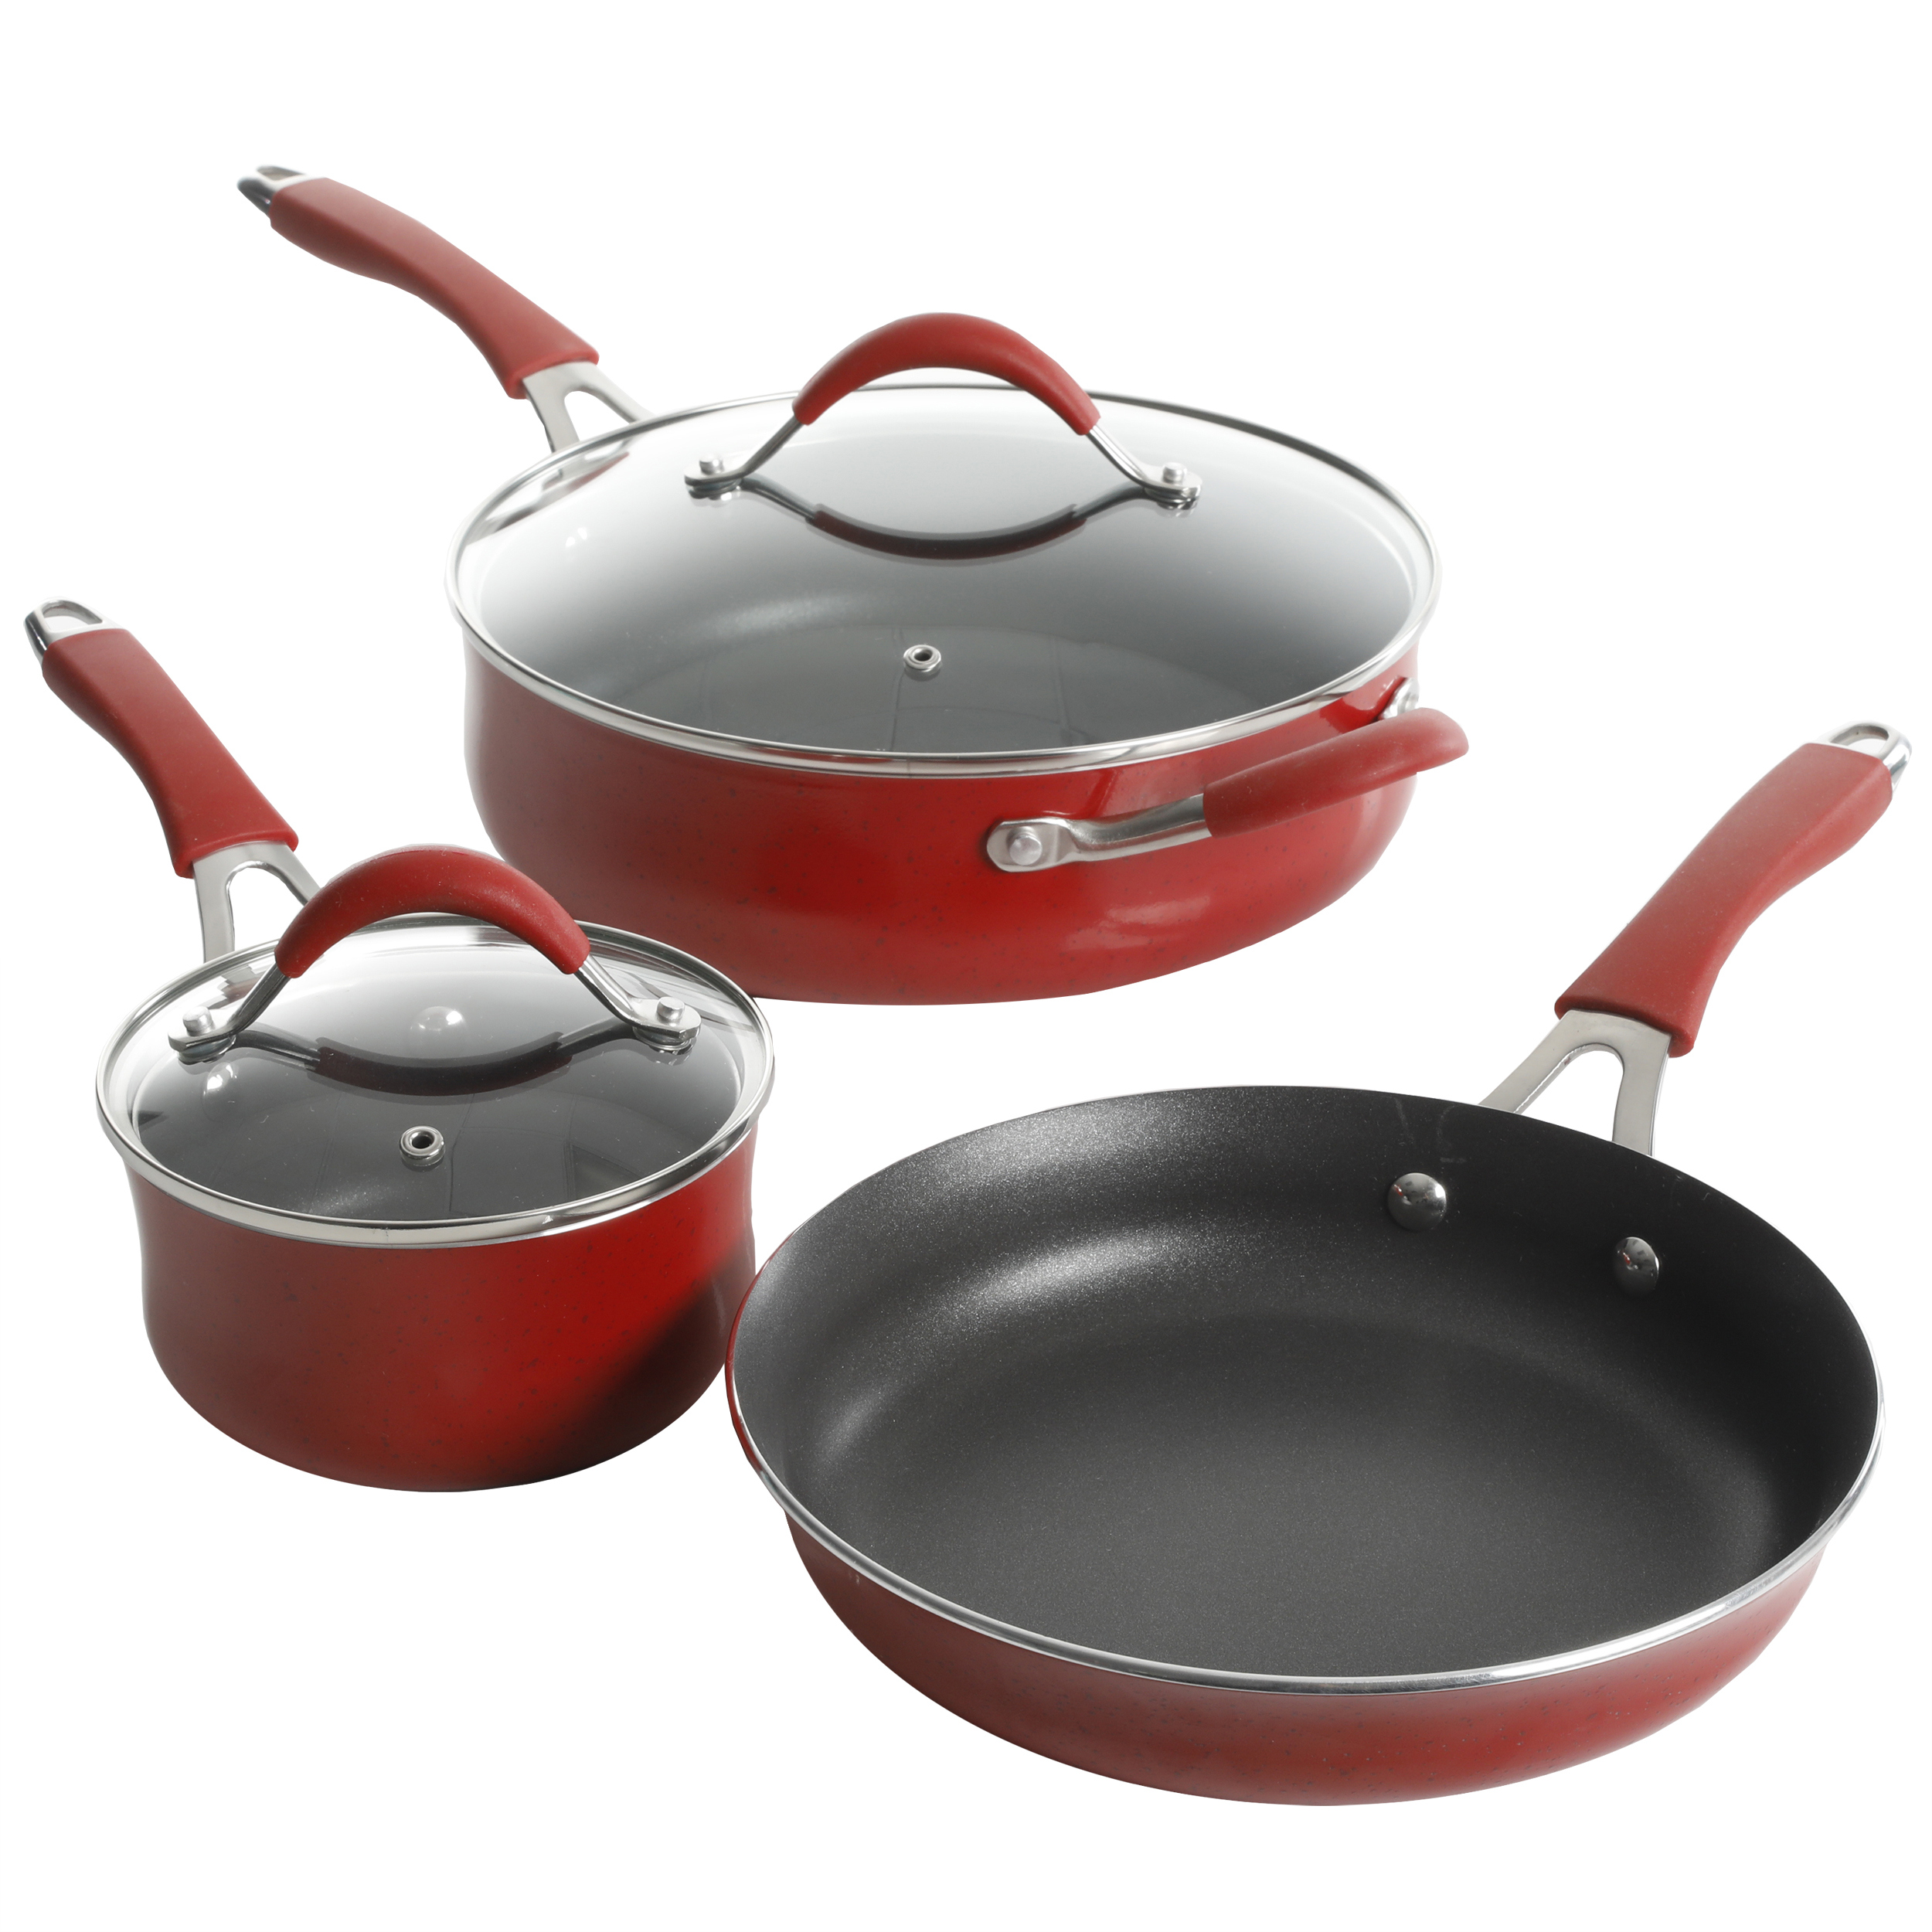 The Pioneer Woman Frontier 5-Piece Non-Stick Aluminum Cookware Set, Red - image 2 of 7